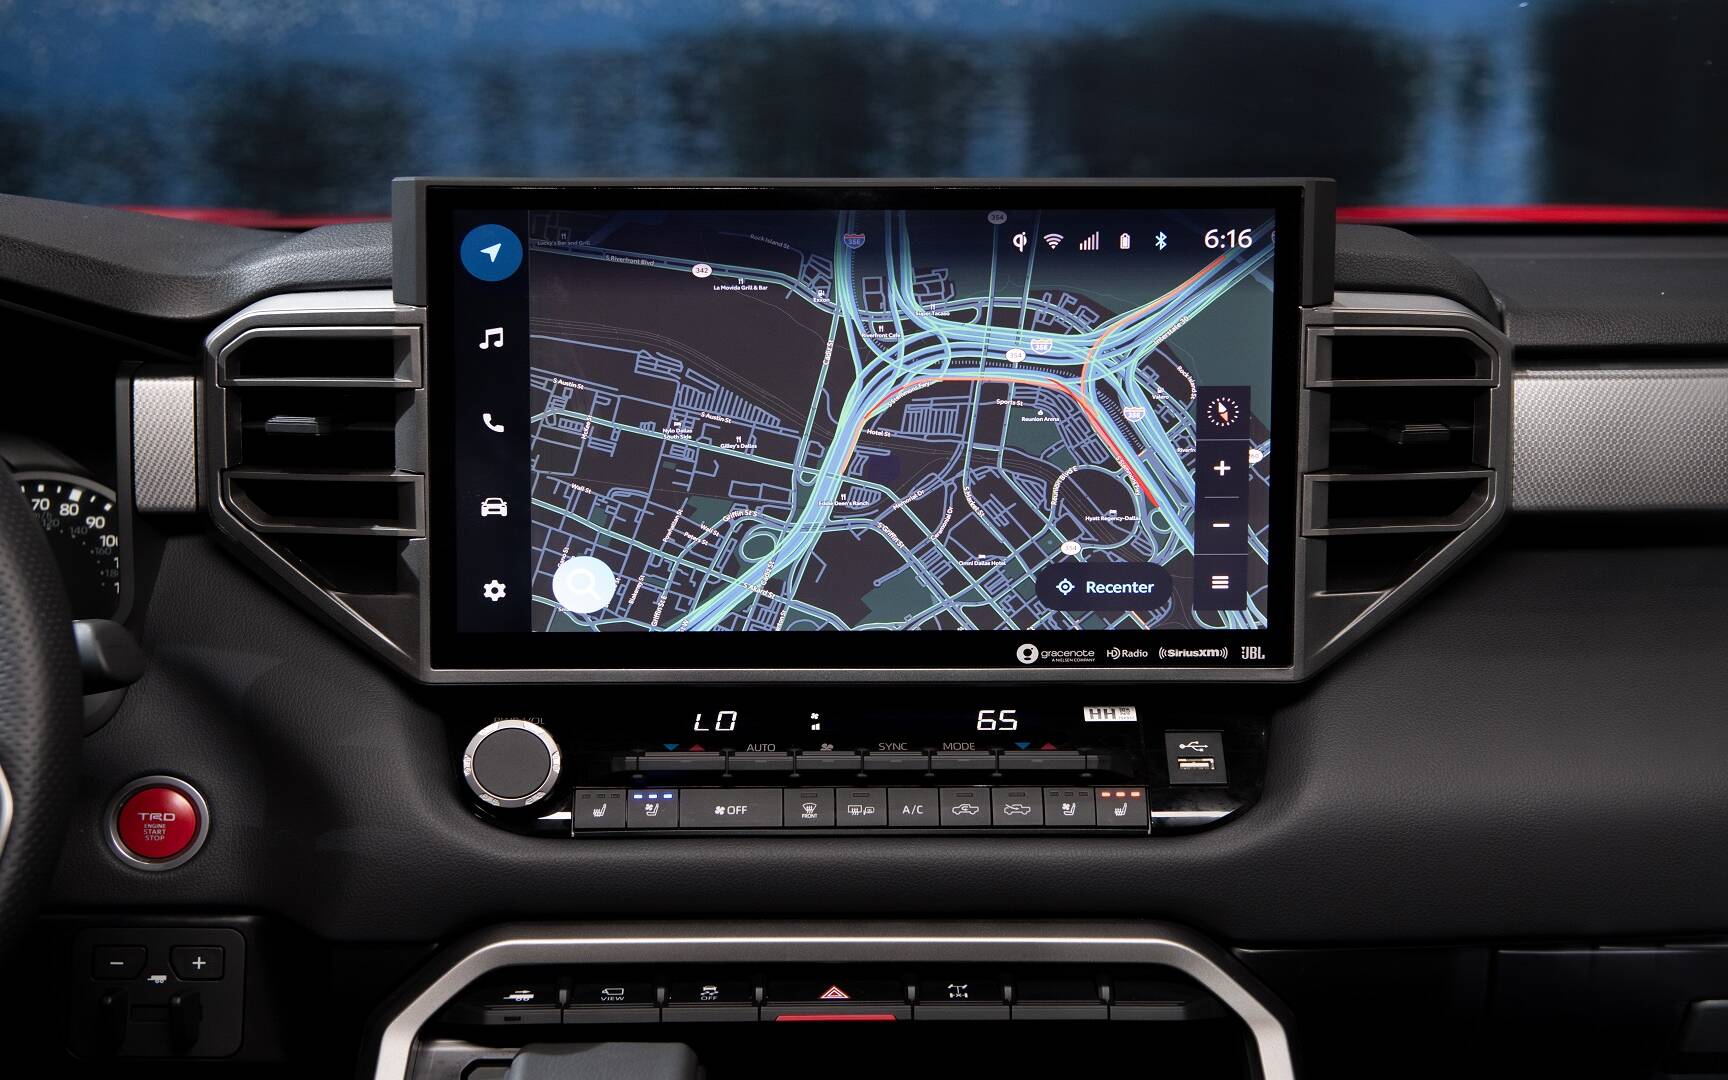 Infotainment Systems - Connected Car Technology and IoT Integration